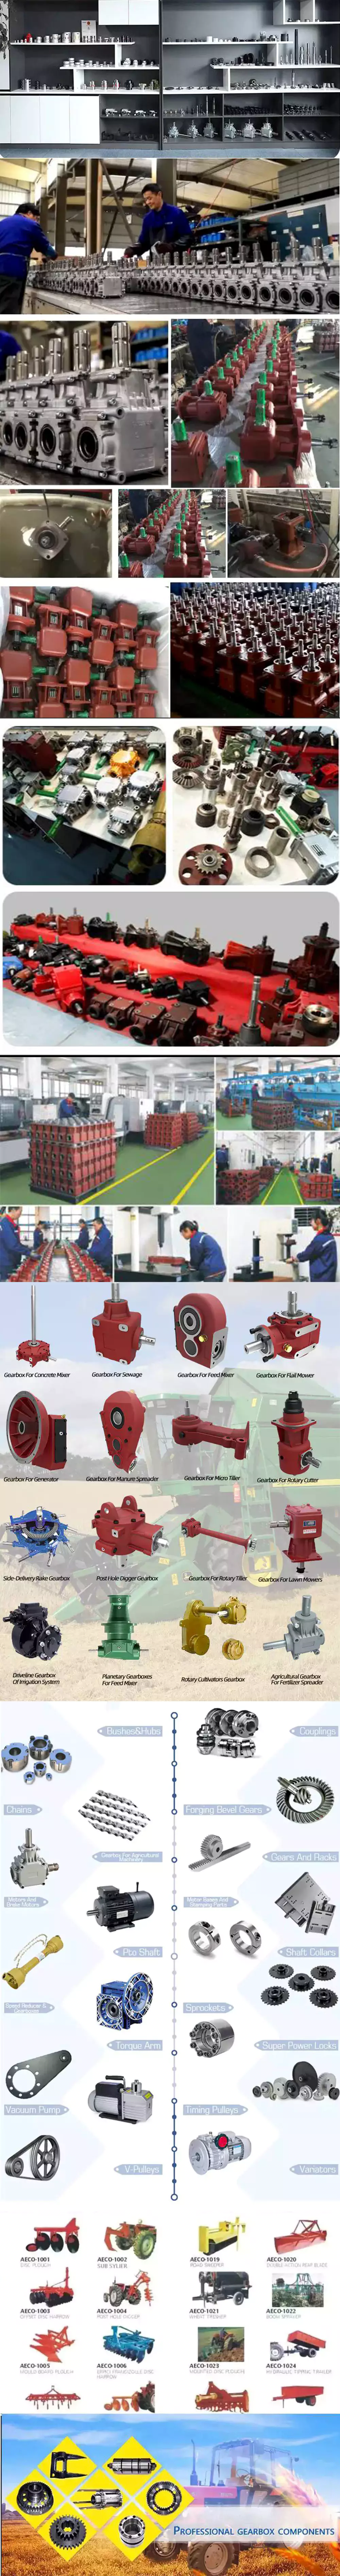 China Professional G3FM-Lm-Ls-Fs Helical Gearbox with Good Wearability and Price   agricultural pto gearbox suppliers	